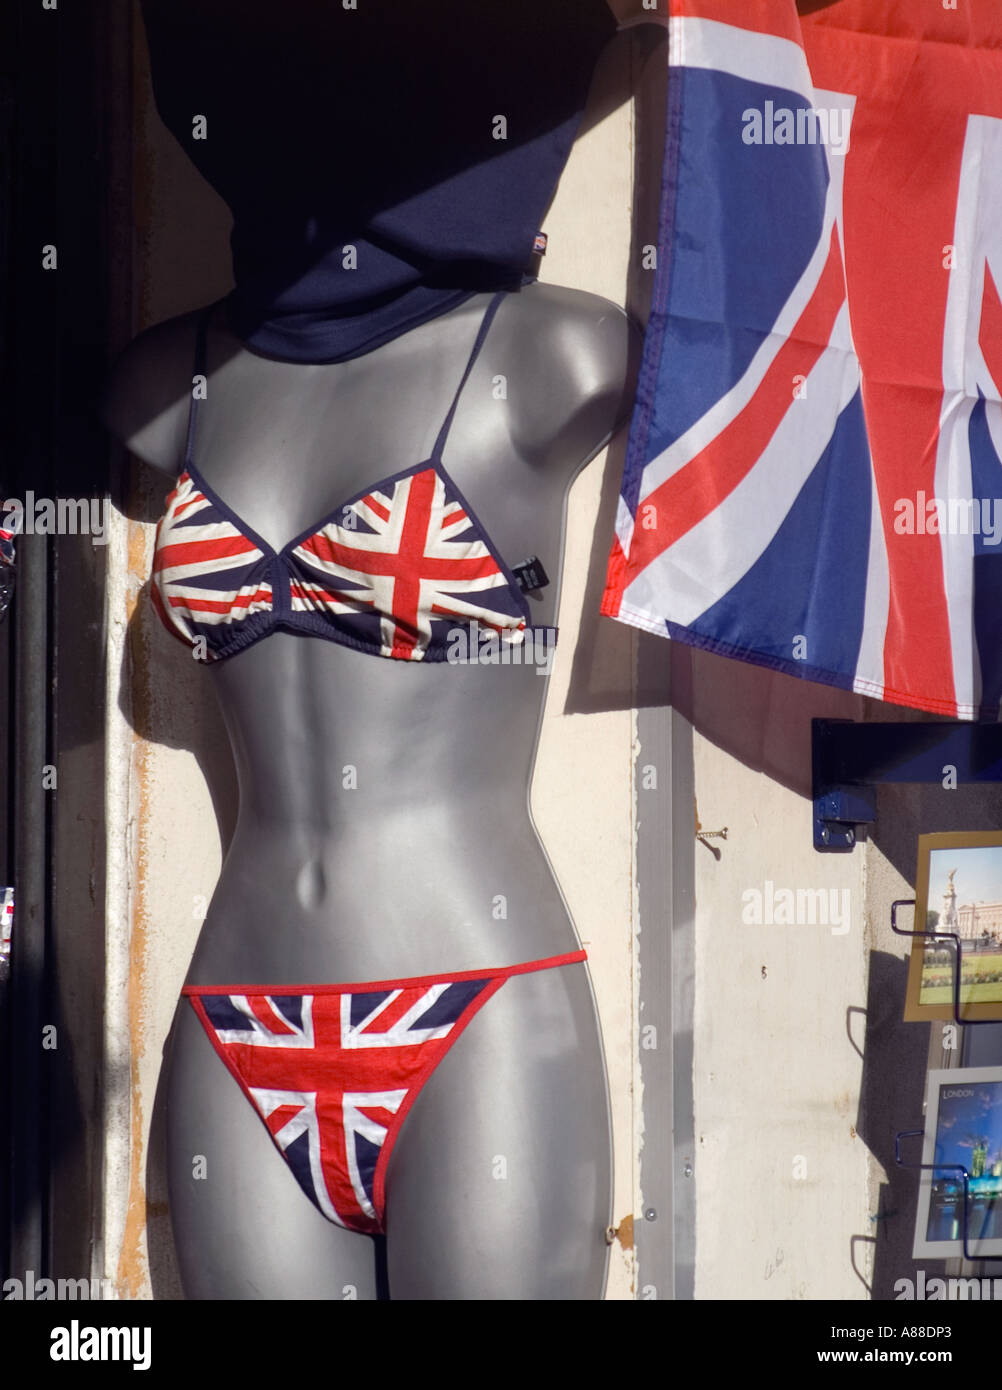 Union Jack bra and knickers on sale in souvenir shop in Oxford Street  LONDON England UK Stock Photo - Alamy